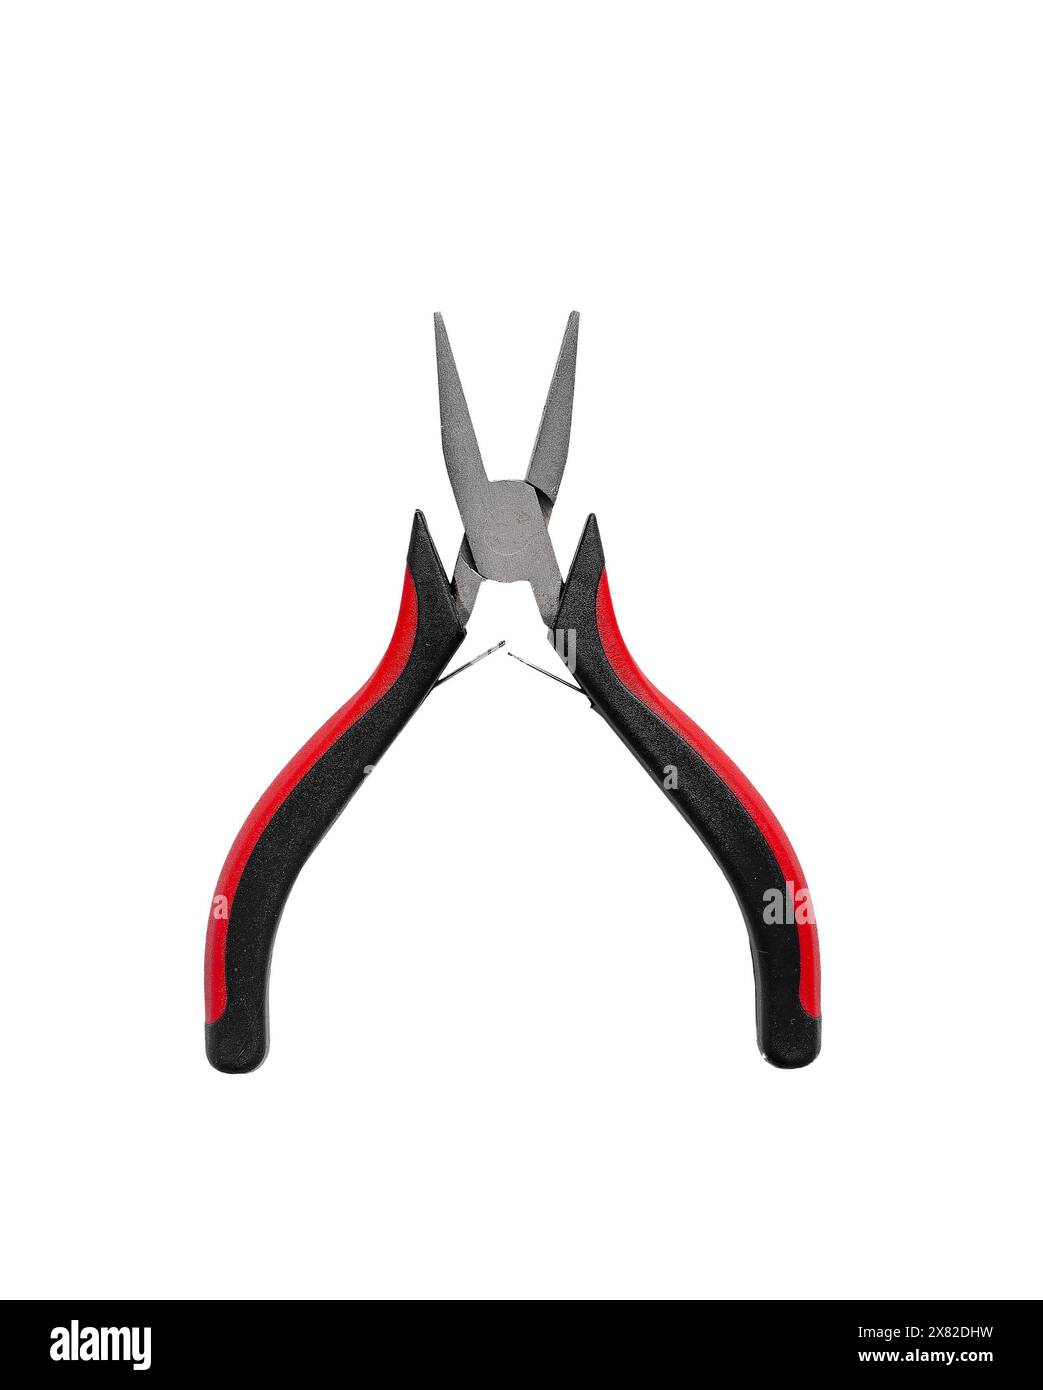 Isolated needle nose pliers on white background, long red clamp tool. Metal equipment for car repair, electrician wire cutting. Industrial tool with g Stock Photo